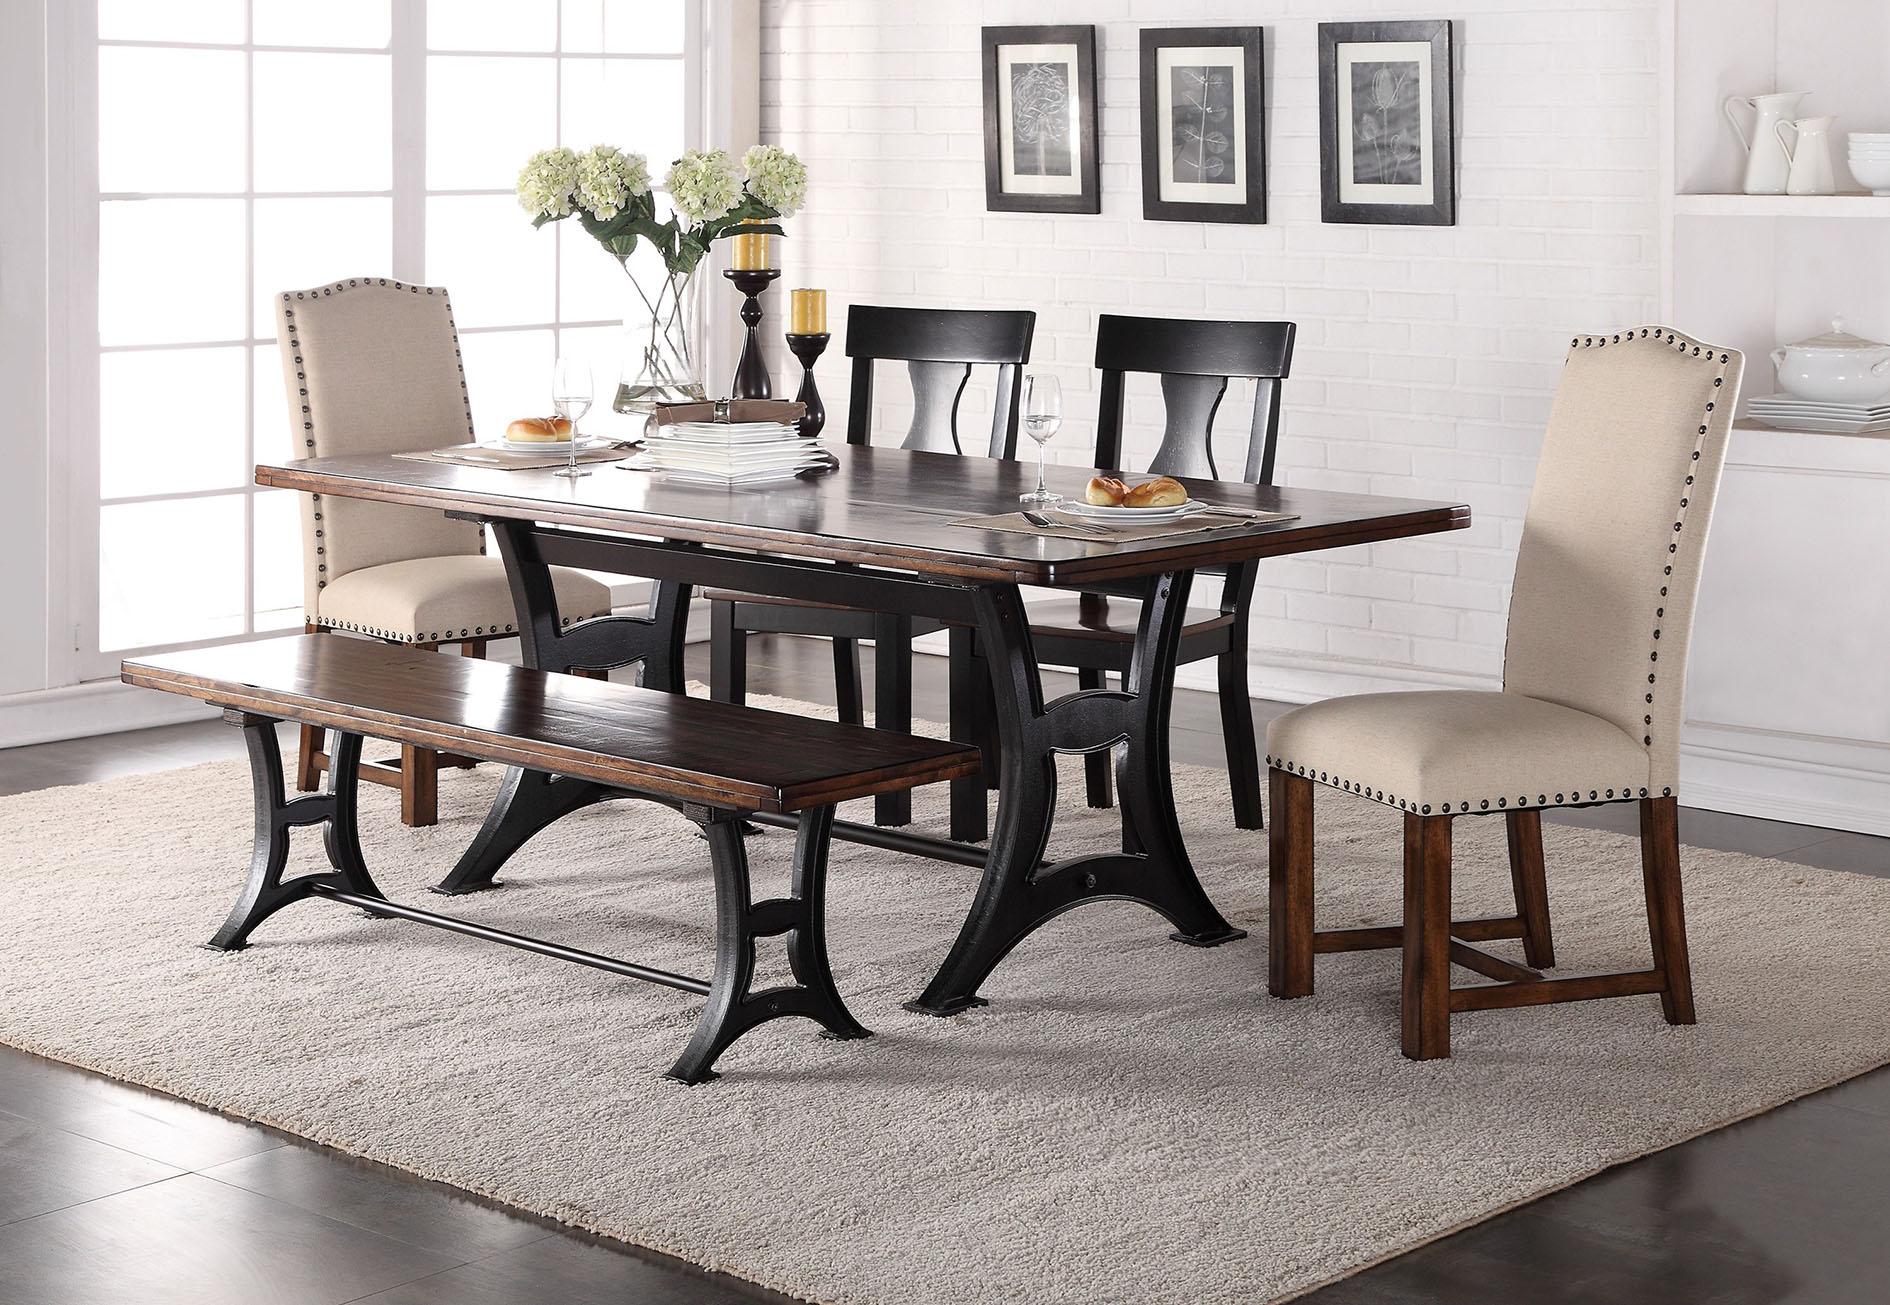 Traditional Dining Sets D2105-2106 Astor D2105-2106-DT-Set-6 in Brown, Walnut, Linen Fabric